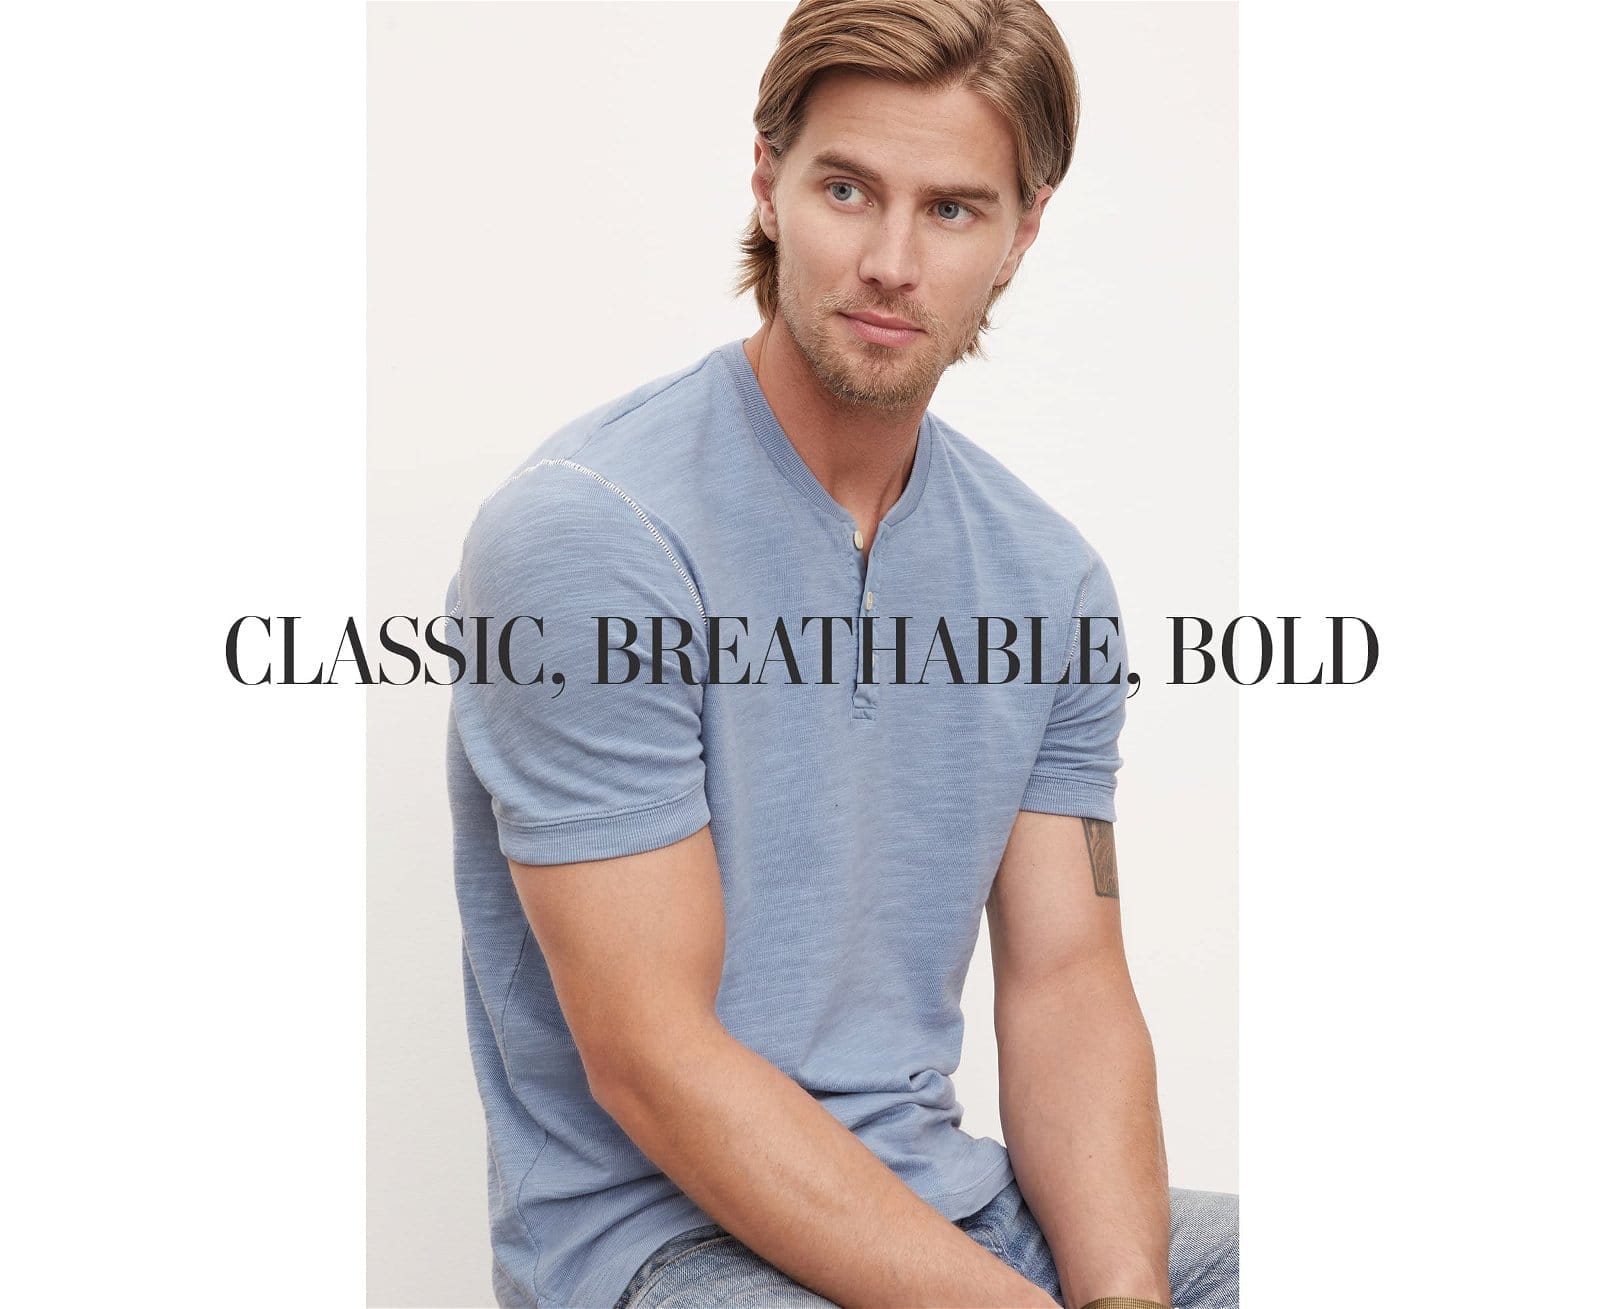 CLASSIC, BREATHABLE, BOLD